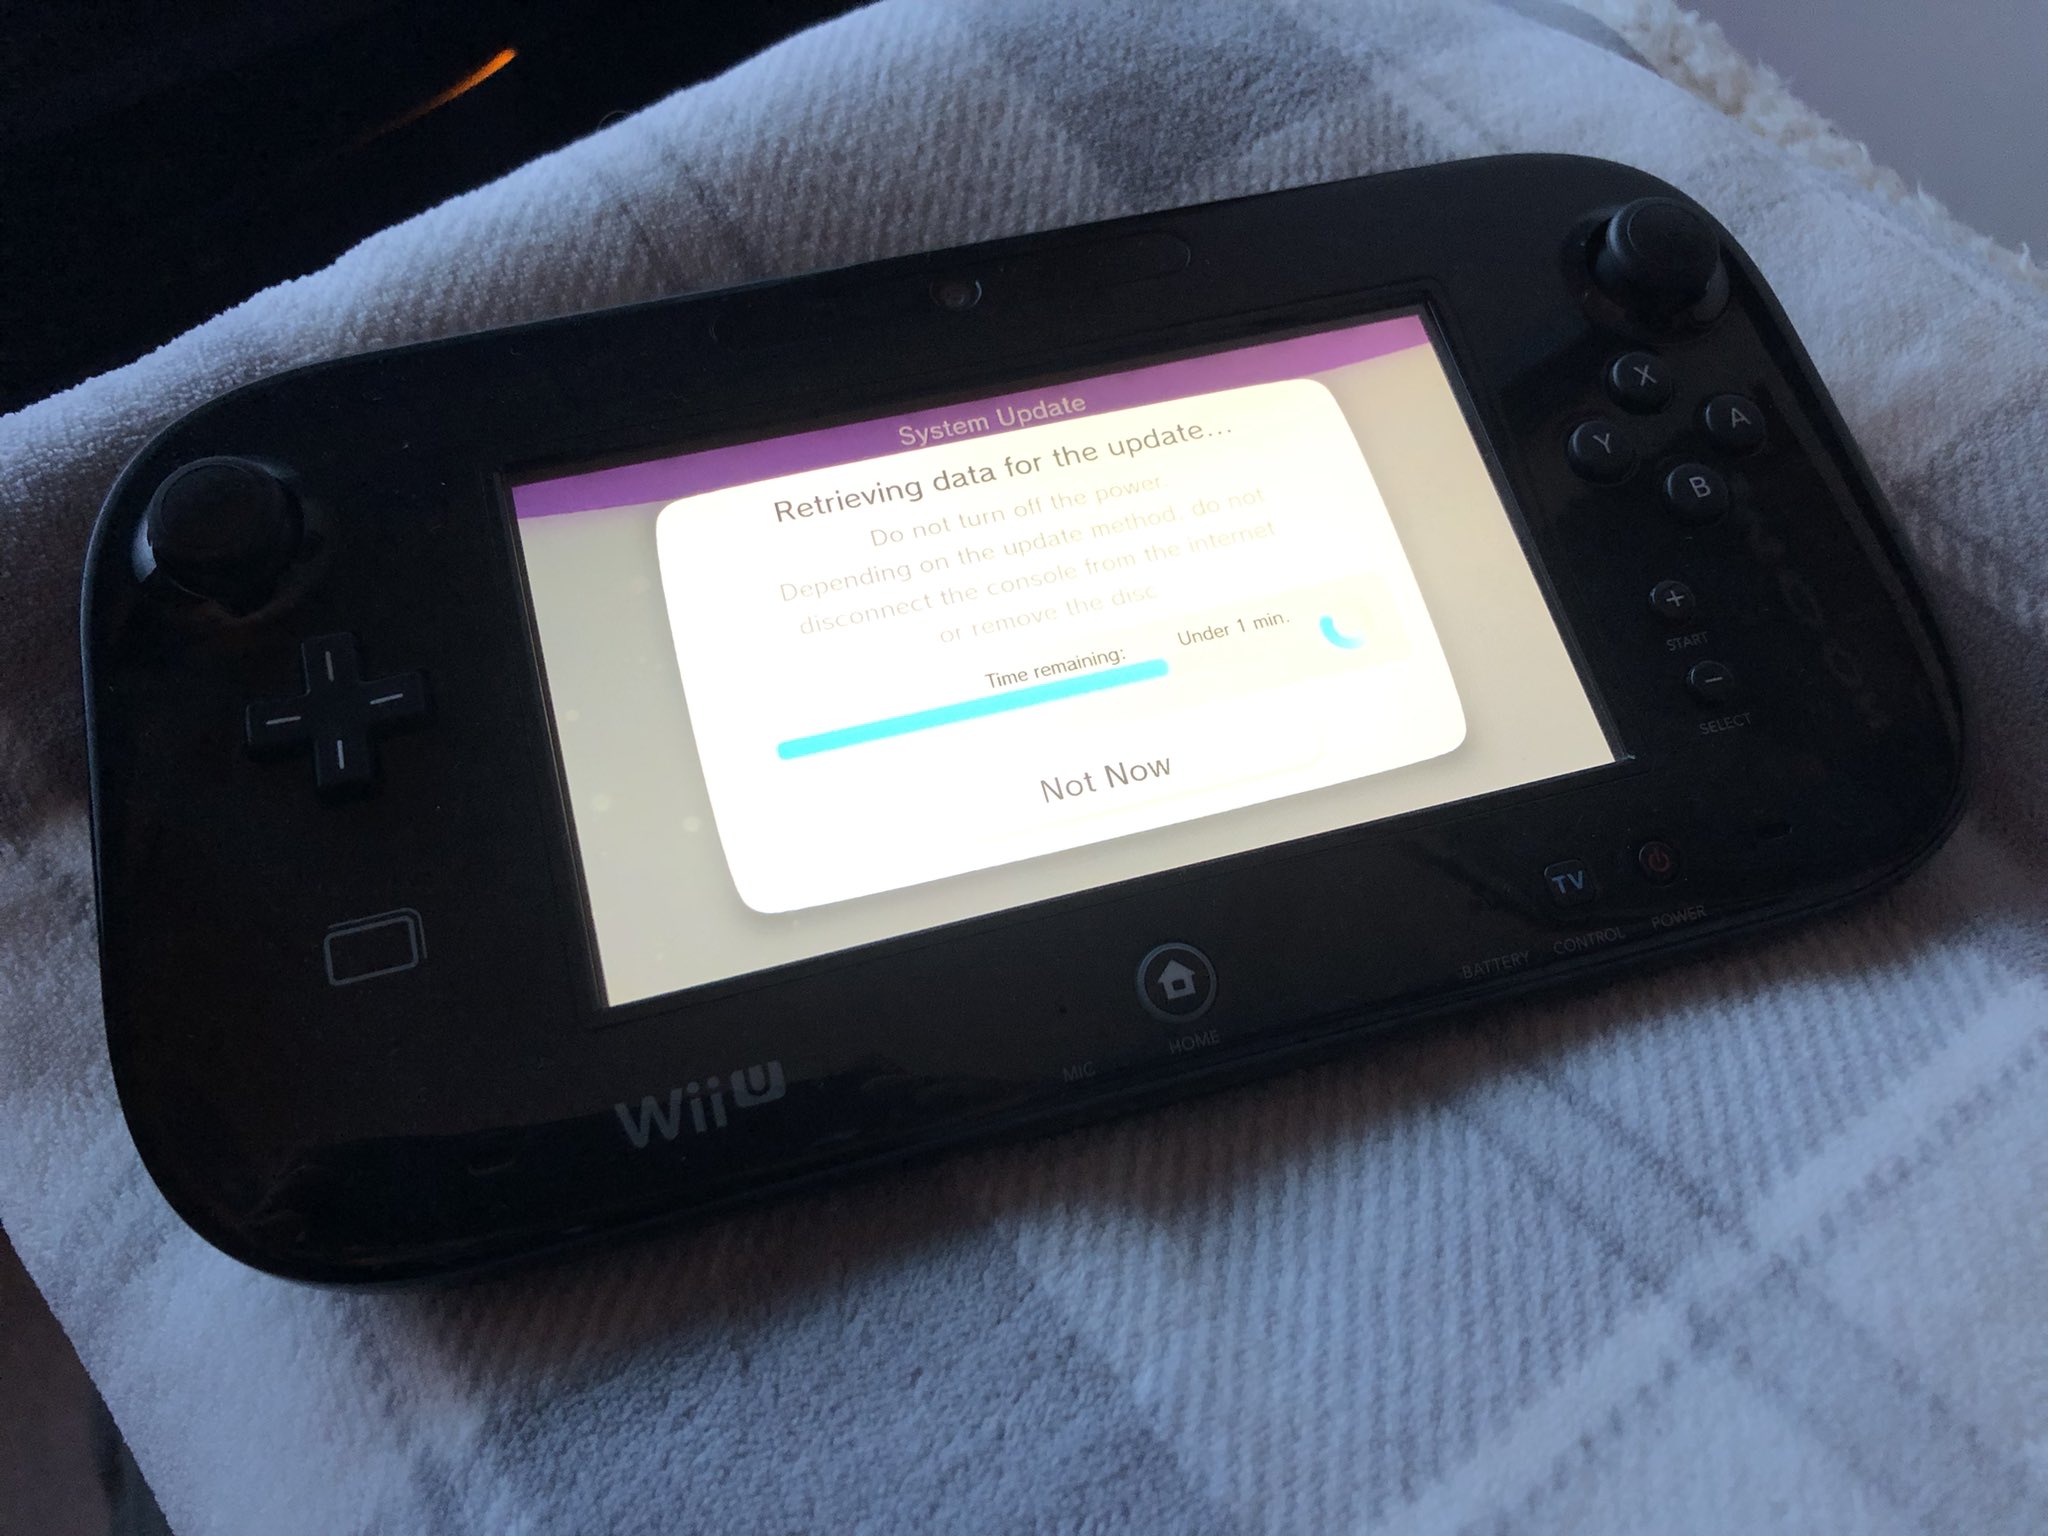 Inhalen Verstrooien T Andrew Dennison on Twitter: "My Wii U is not bricked! Remember to  periodically turn on your old Wii U folks, or risk NAND flash failure.  https://t.co/i2pwosU1rl" / Twitter